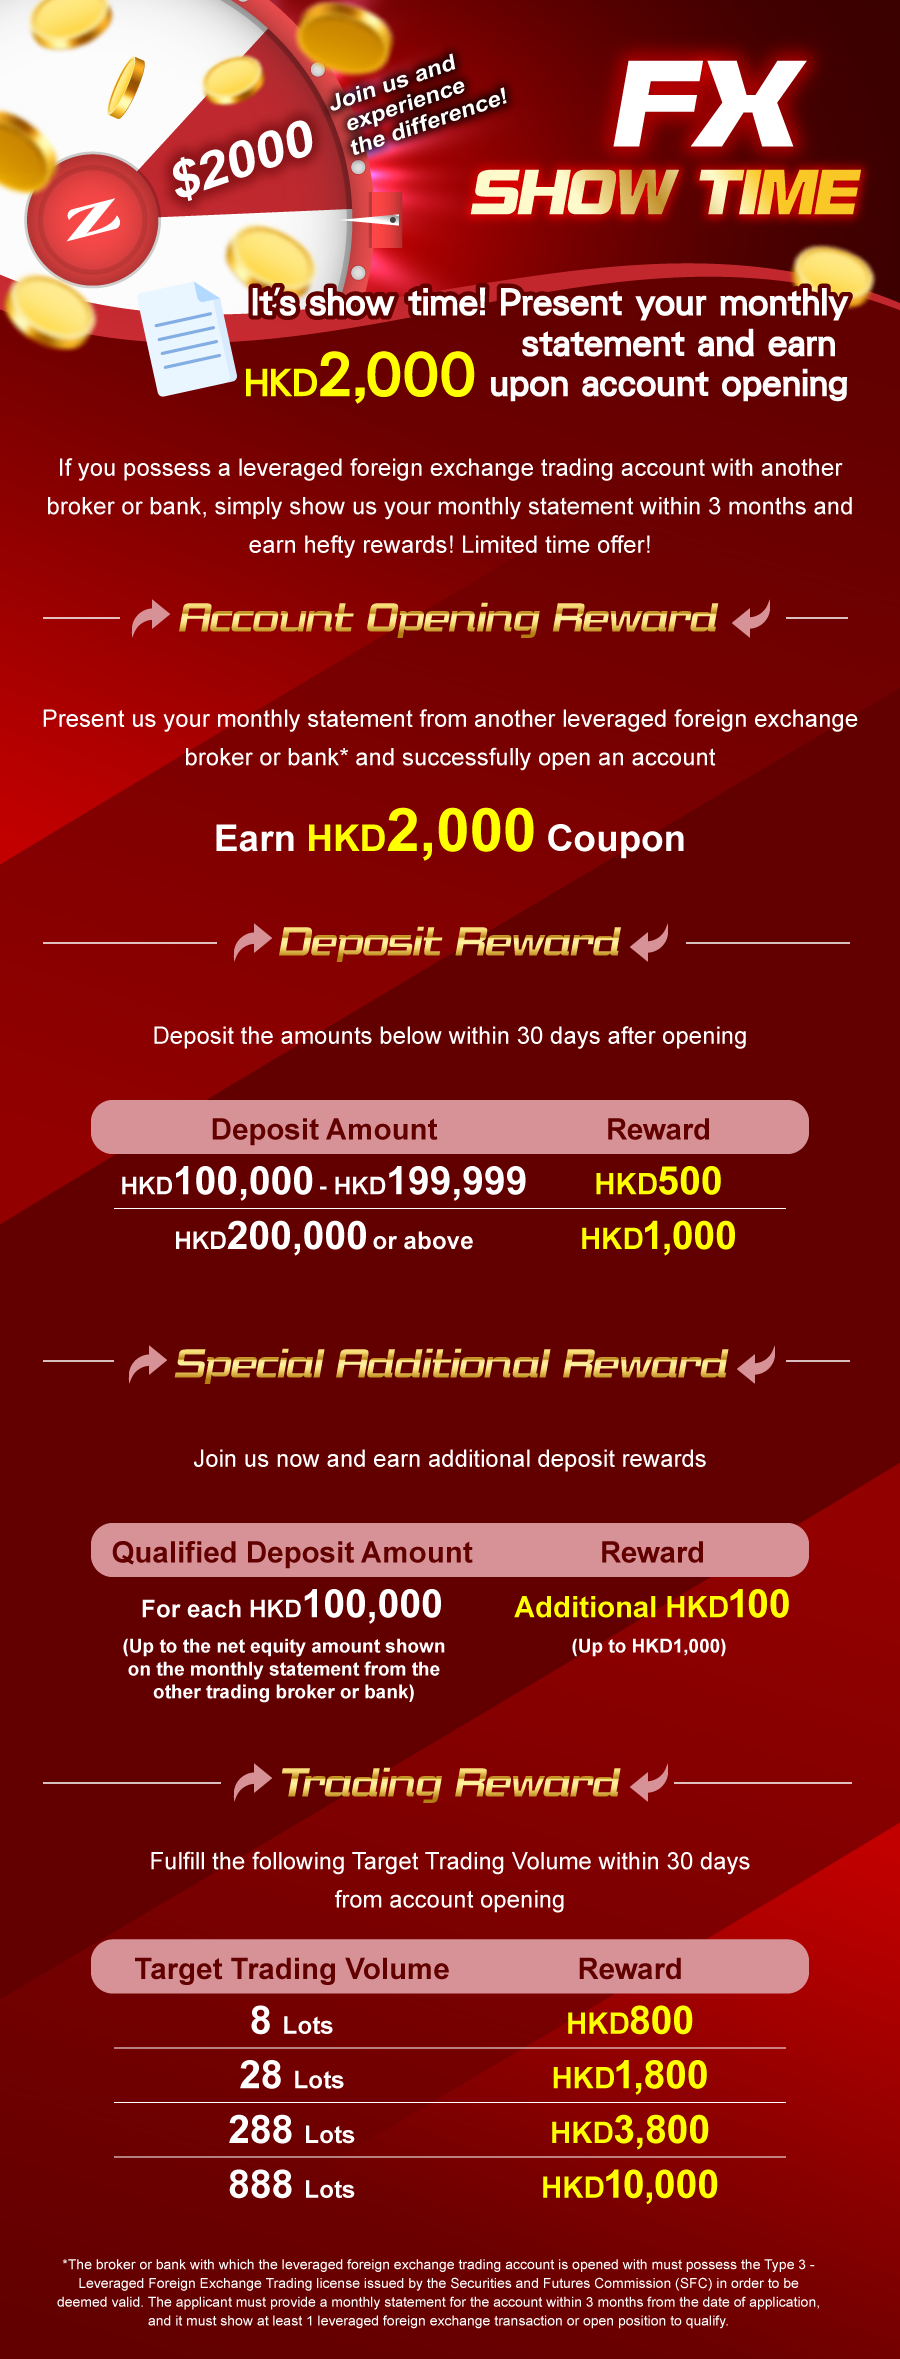 FX Show Time - Limited Time Offer! Earn HKD2,000 Upon Account Opening, and up to HKD14,000 in Total Rewards!